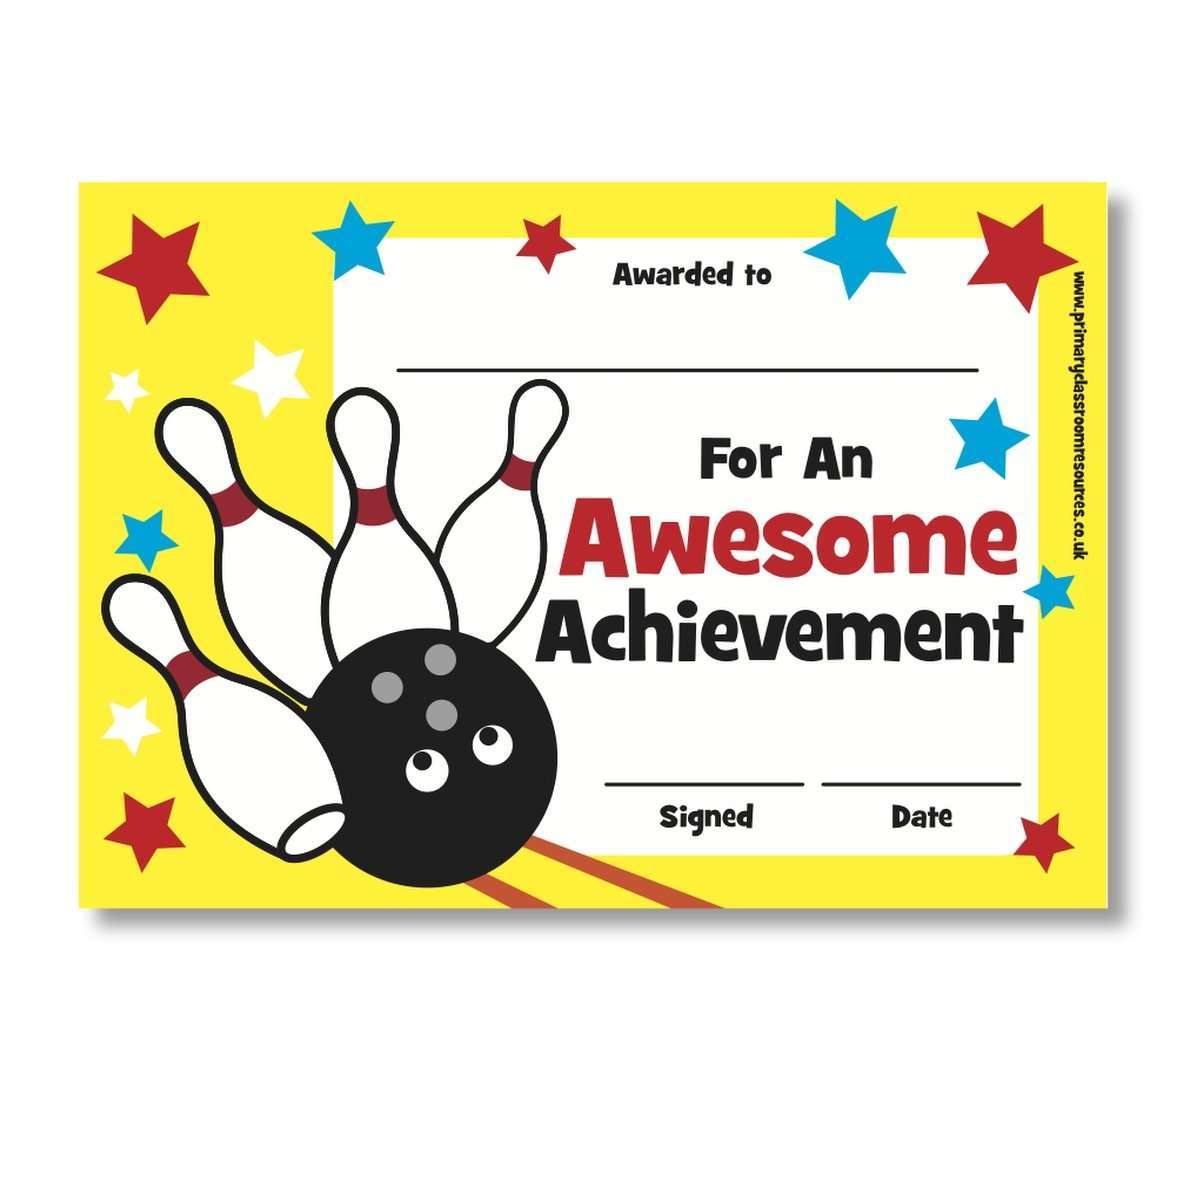 Sticky Certificates - Awesome Achievement:Primary Classroom Resources